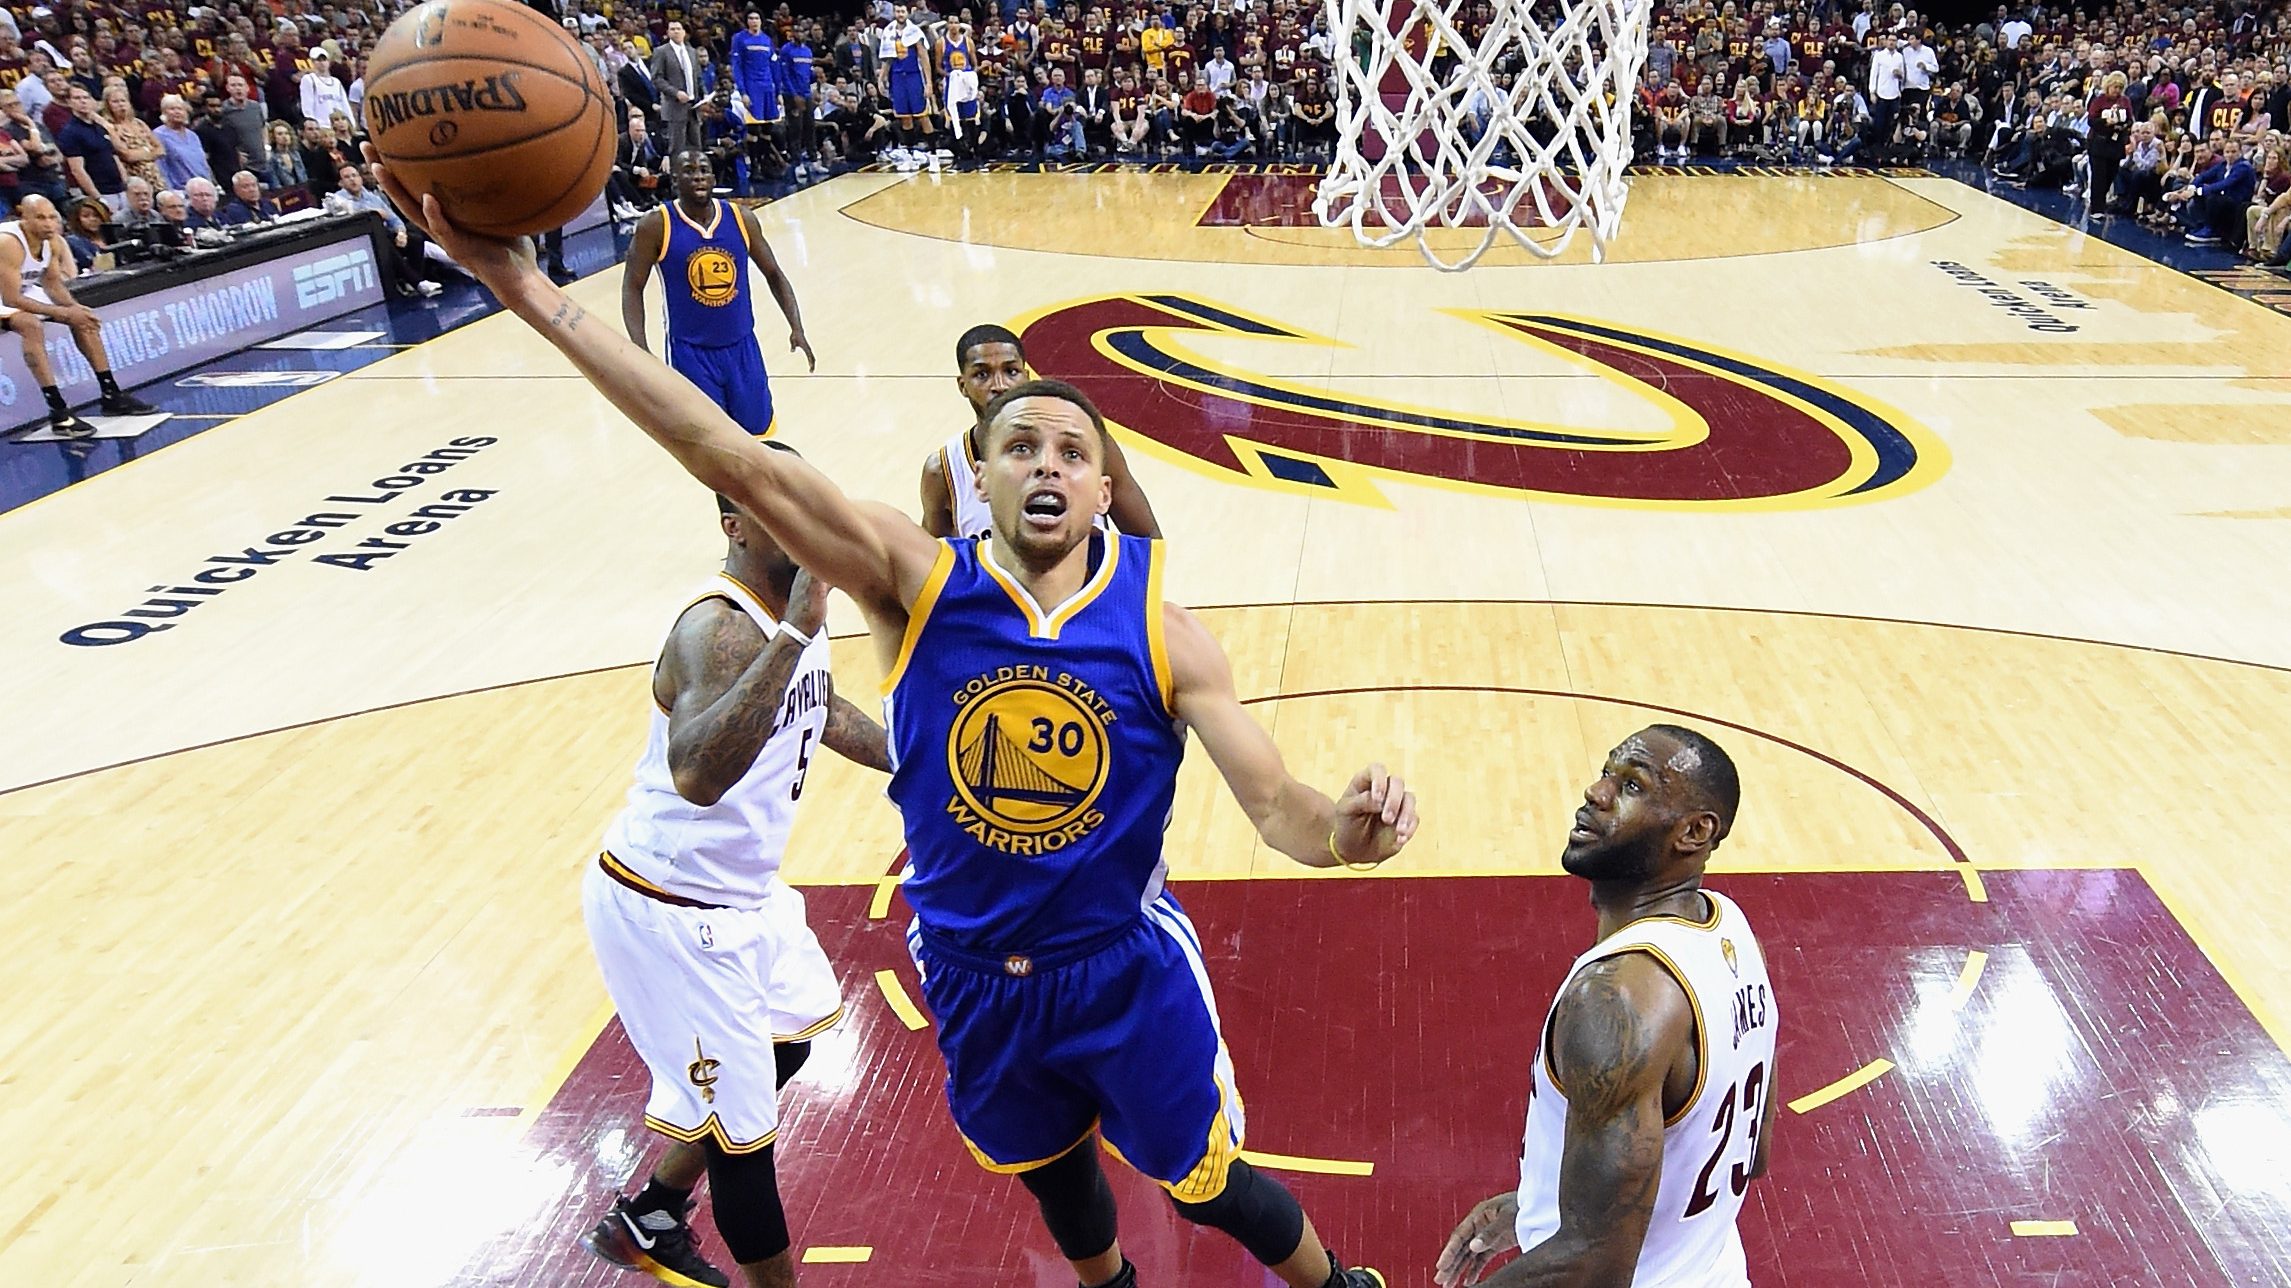 Cavs vs. Warriors Live Stream How to Watch Game 5 Free